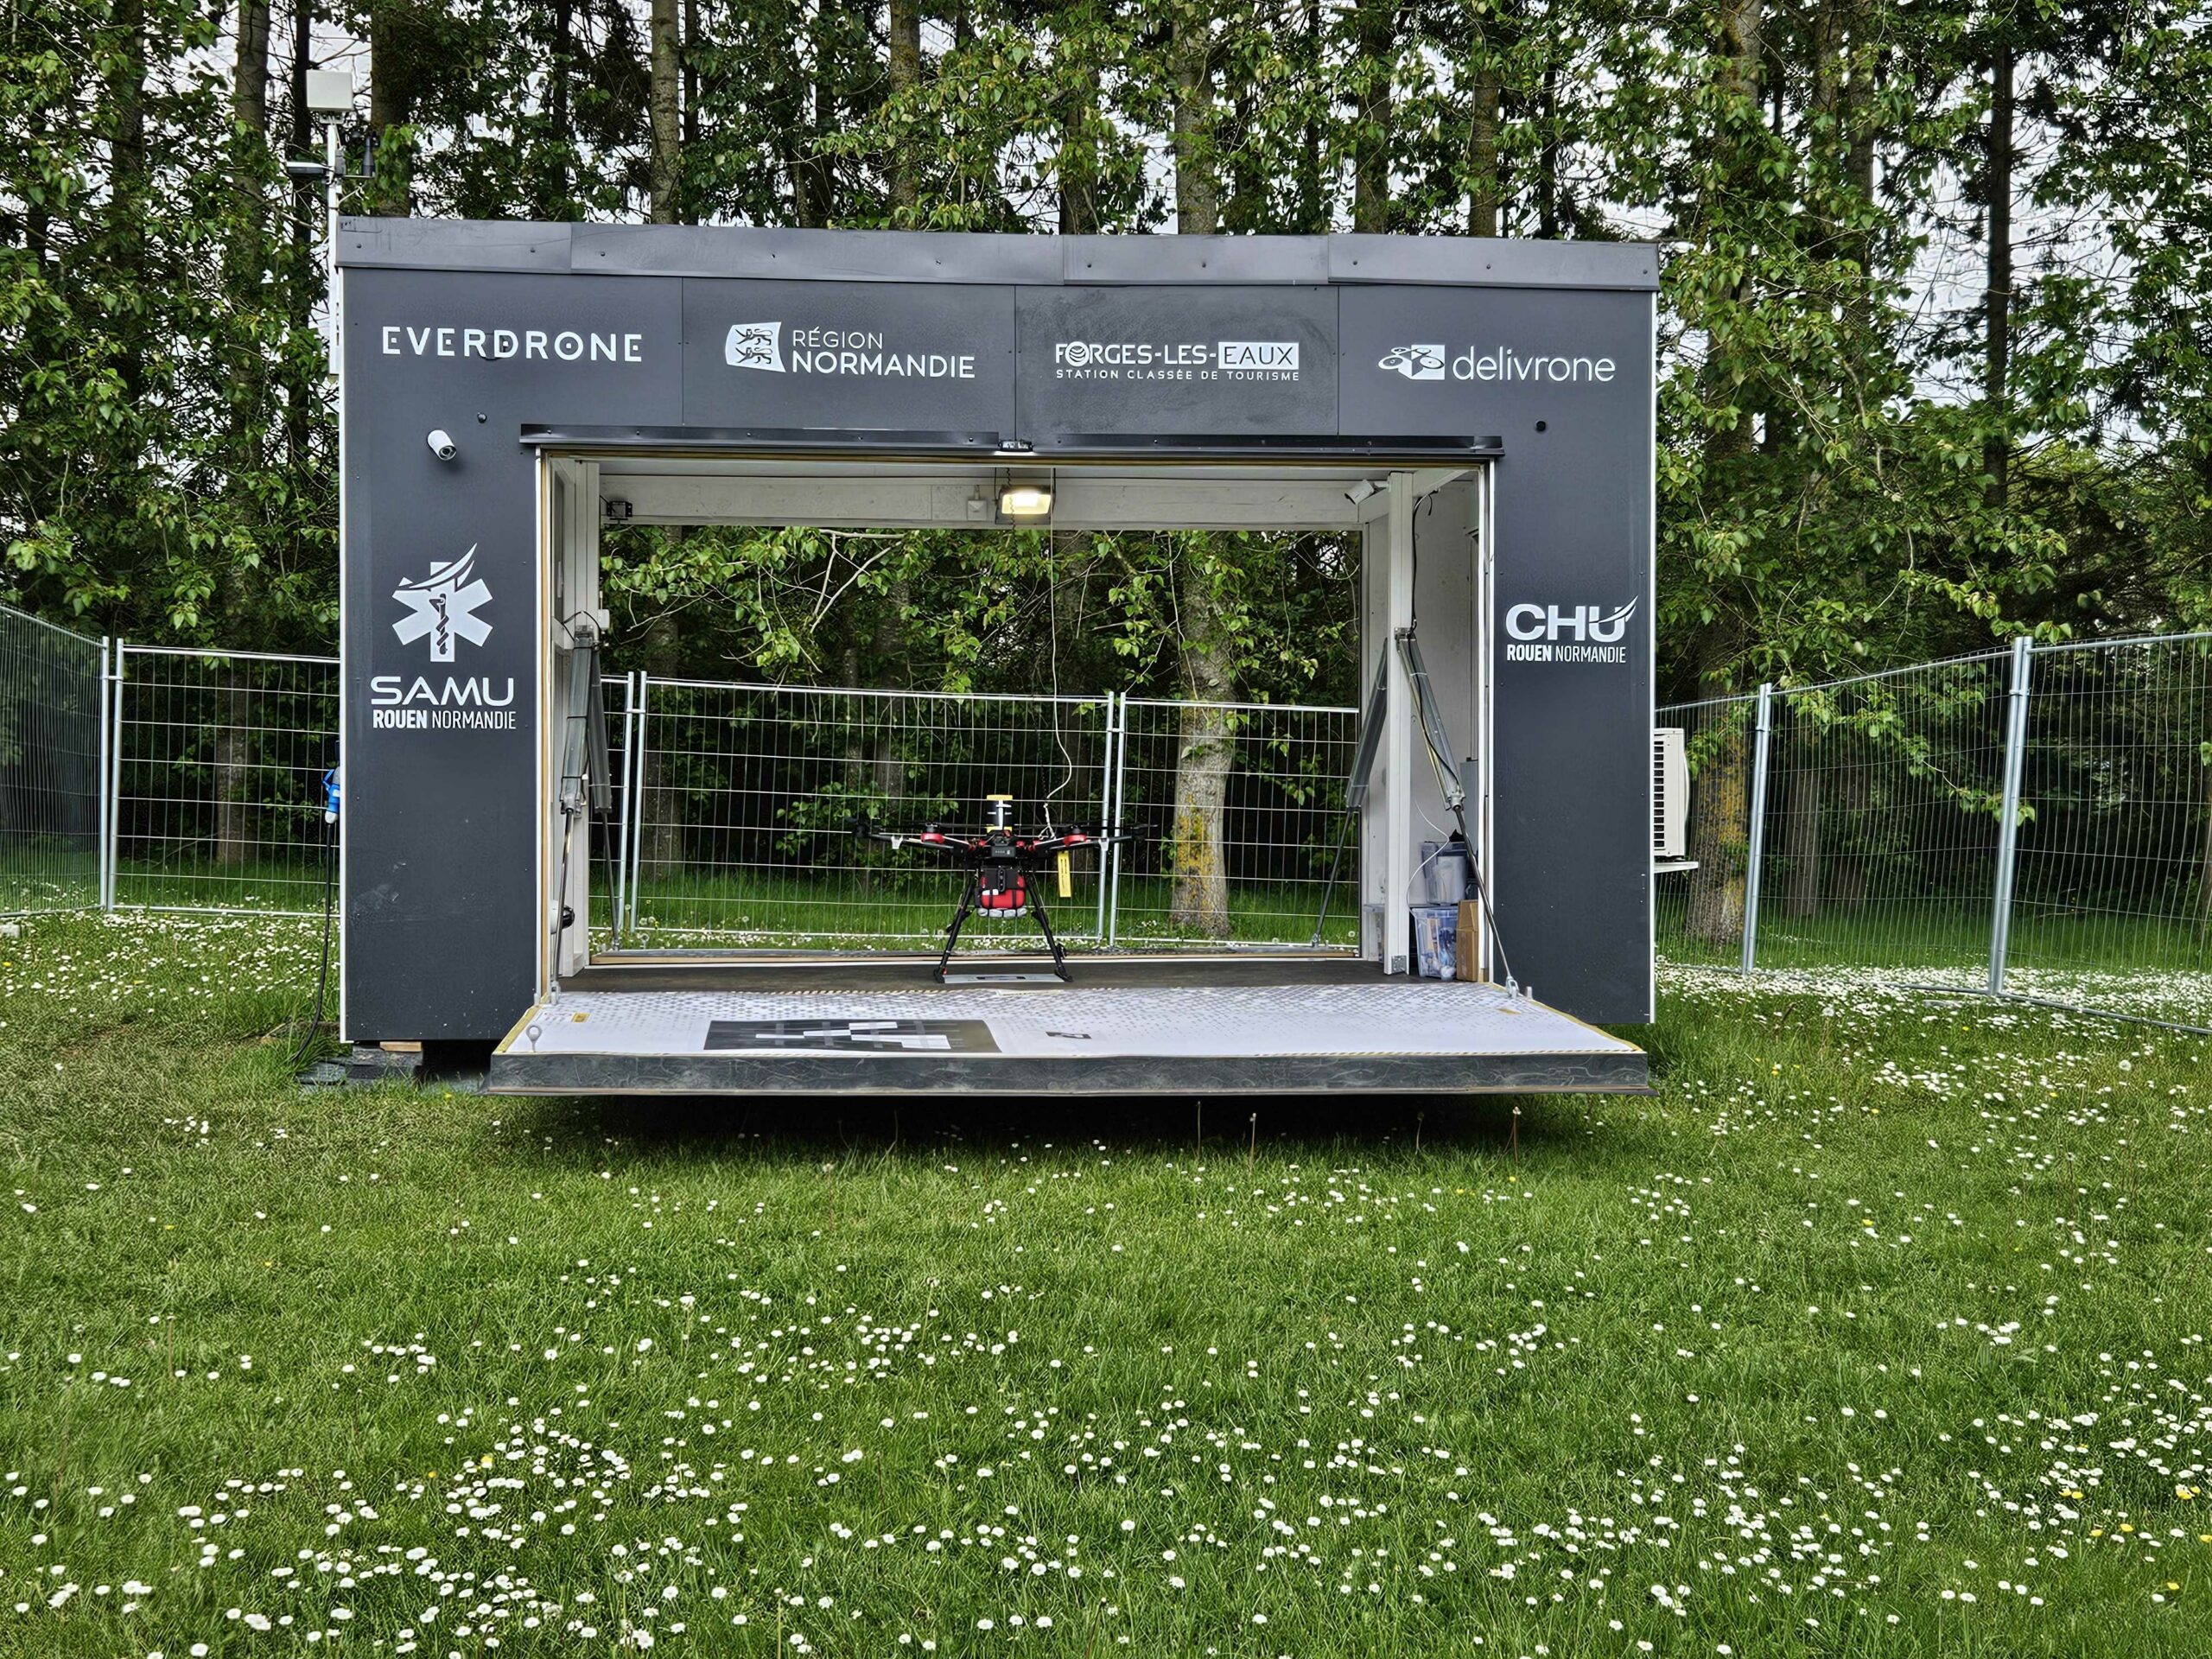 A drone hangar with logos for Everdrone, Région Normandie, Forges-les-Eaux, Delivrone, and CHU Rouen Normandie stands in a grassy area surrounded by trees. Inside the building, a drone is visible on the platform, ready for deployment.